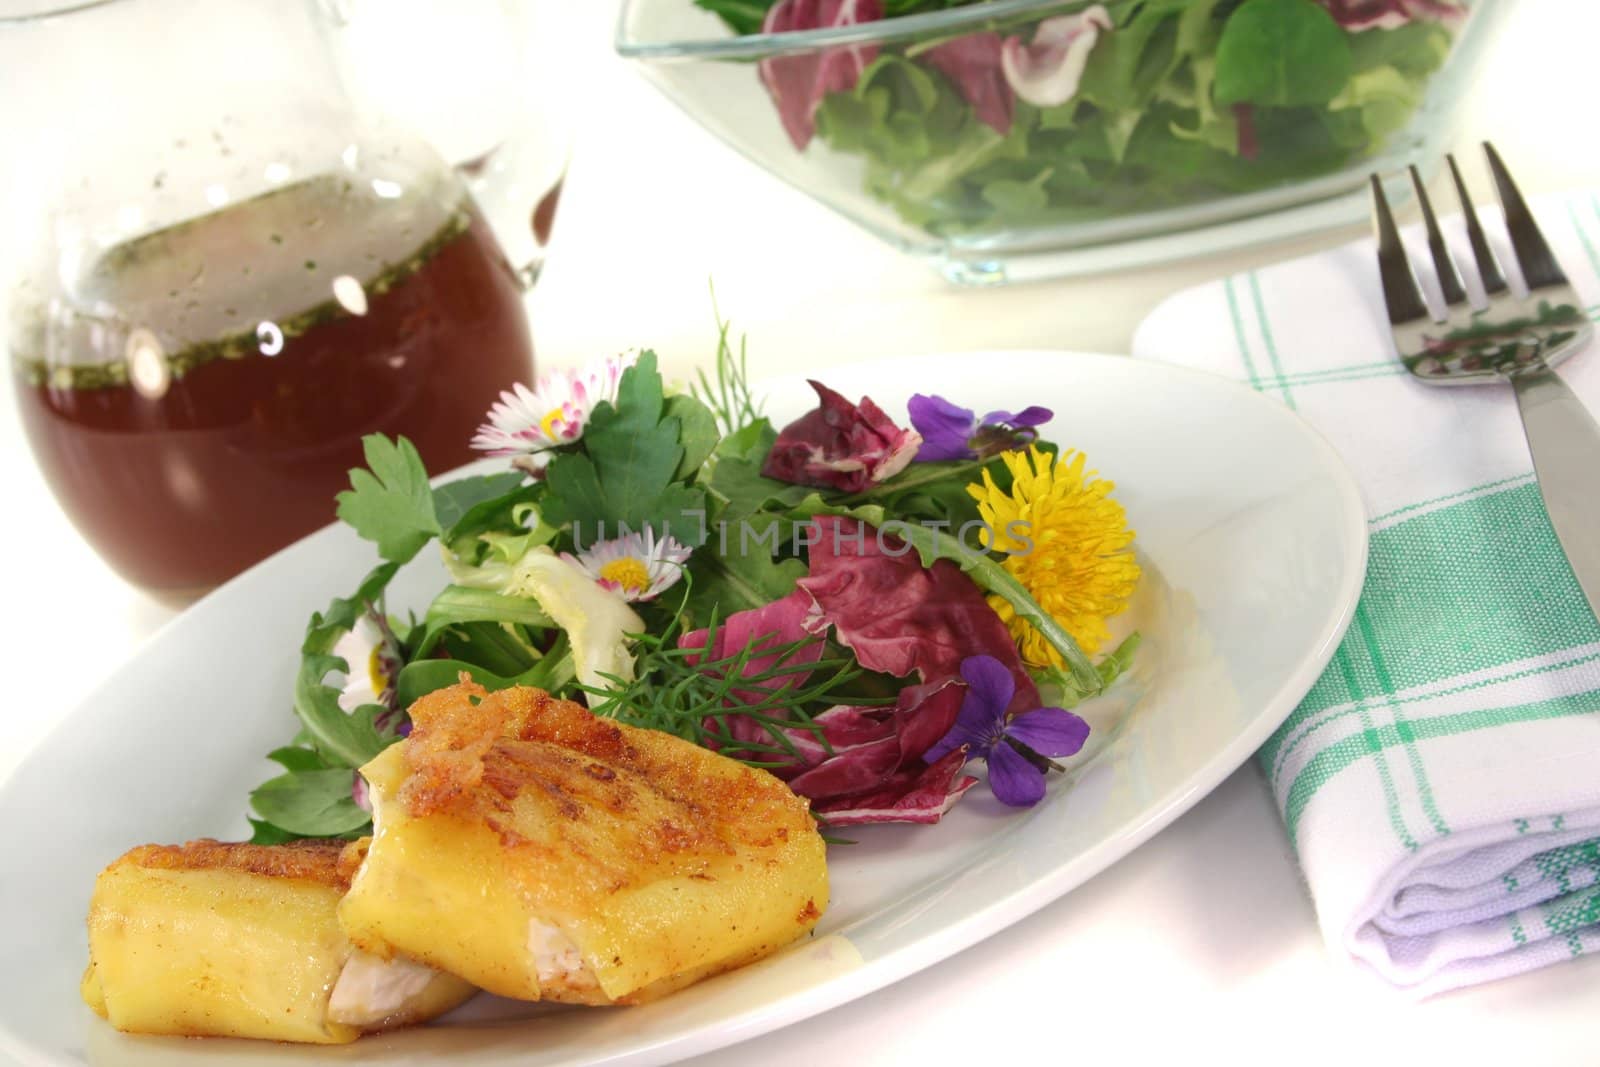 Wild herb salad with goat cheese by discovery